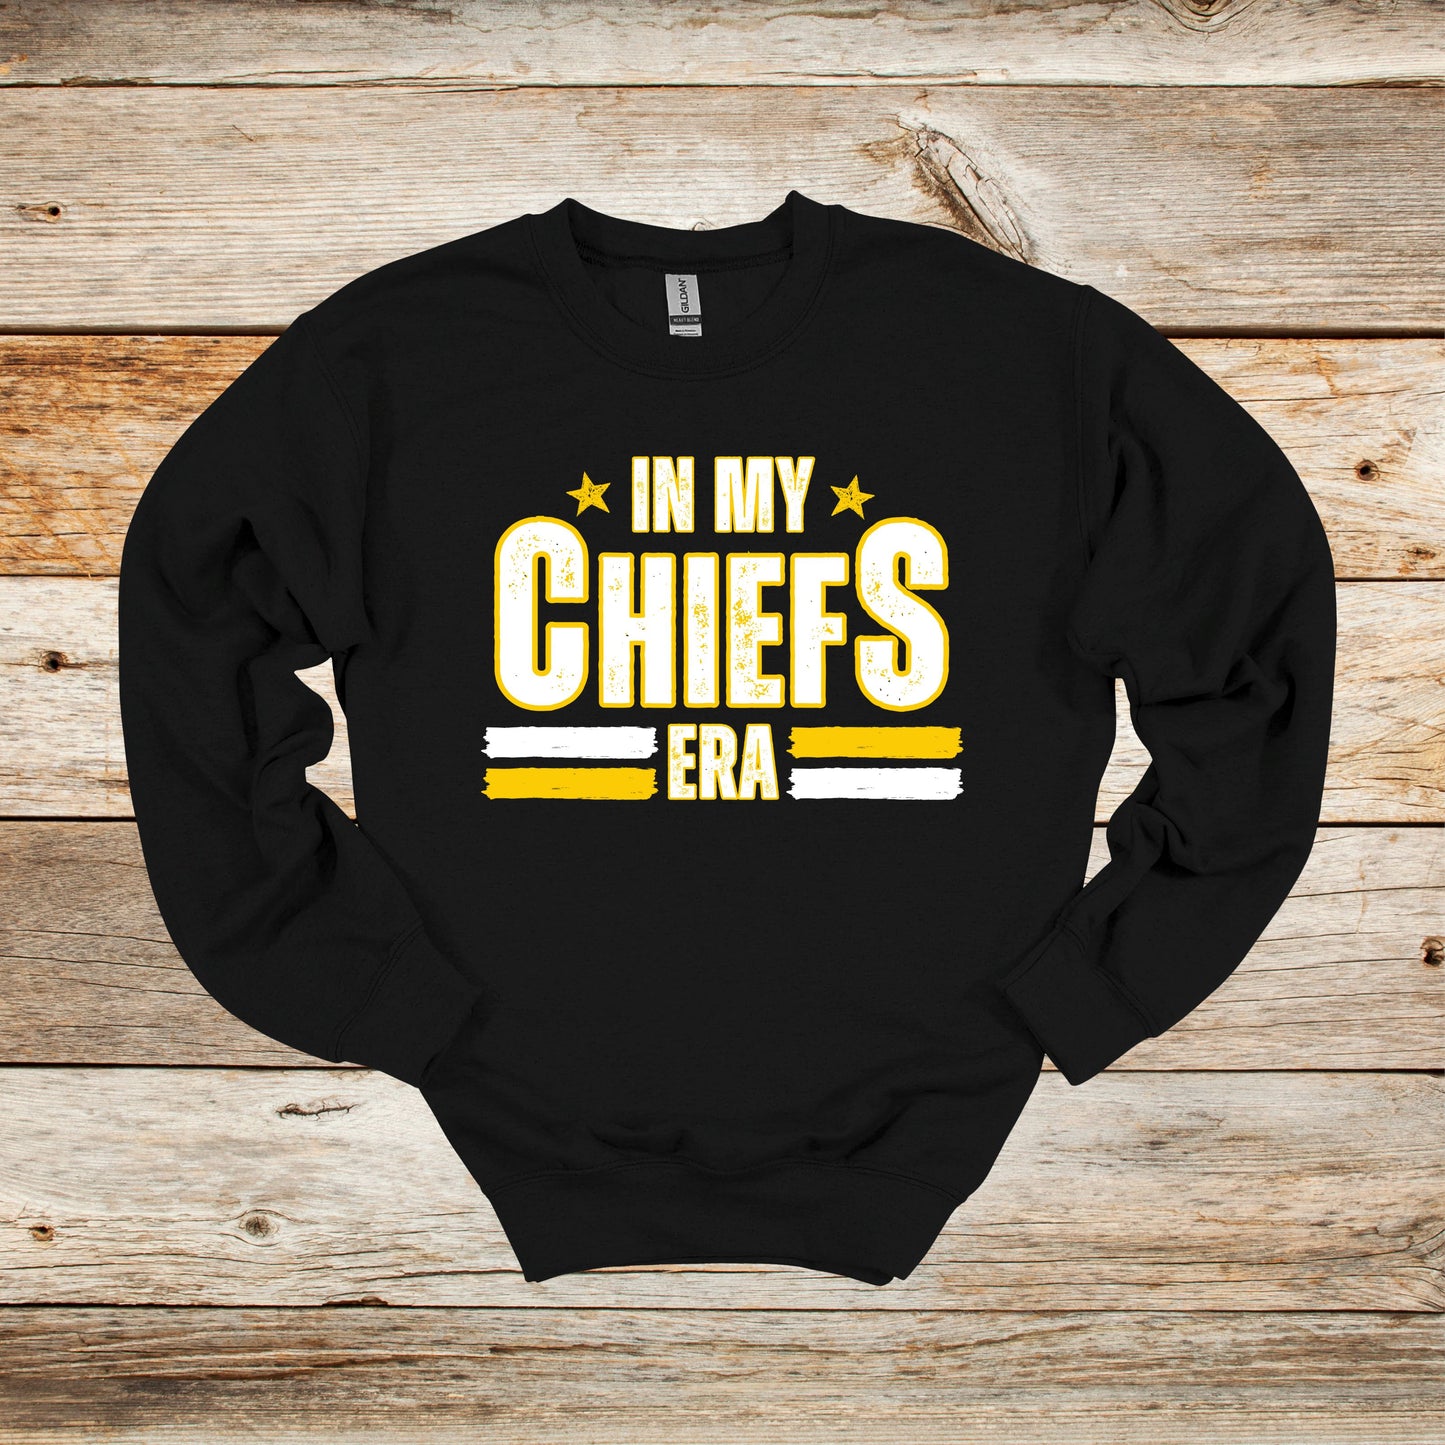 Football Crewneck and Hooded Sweatshirt - Chiefs Football - In My Chiefs Era - Adult and Children's Tee Shirts - Sports Hooded Sweatshirt Graphic Avenue Crewneck Sweatshirt Black Adult Small